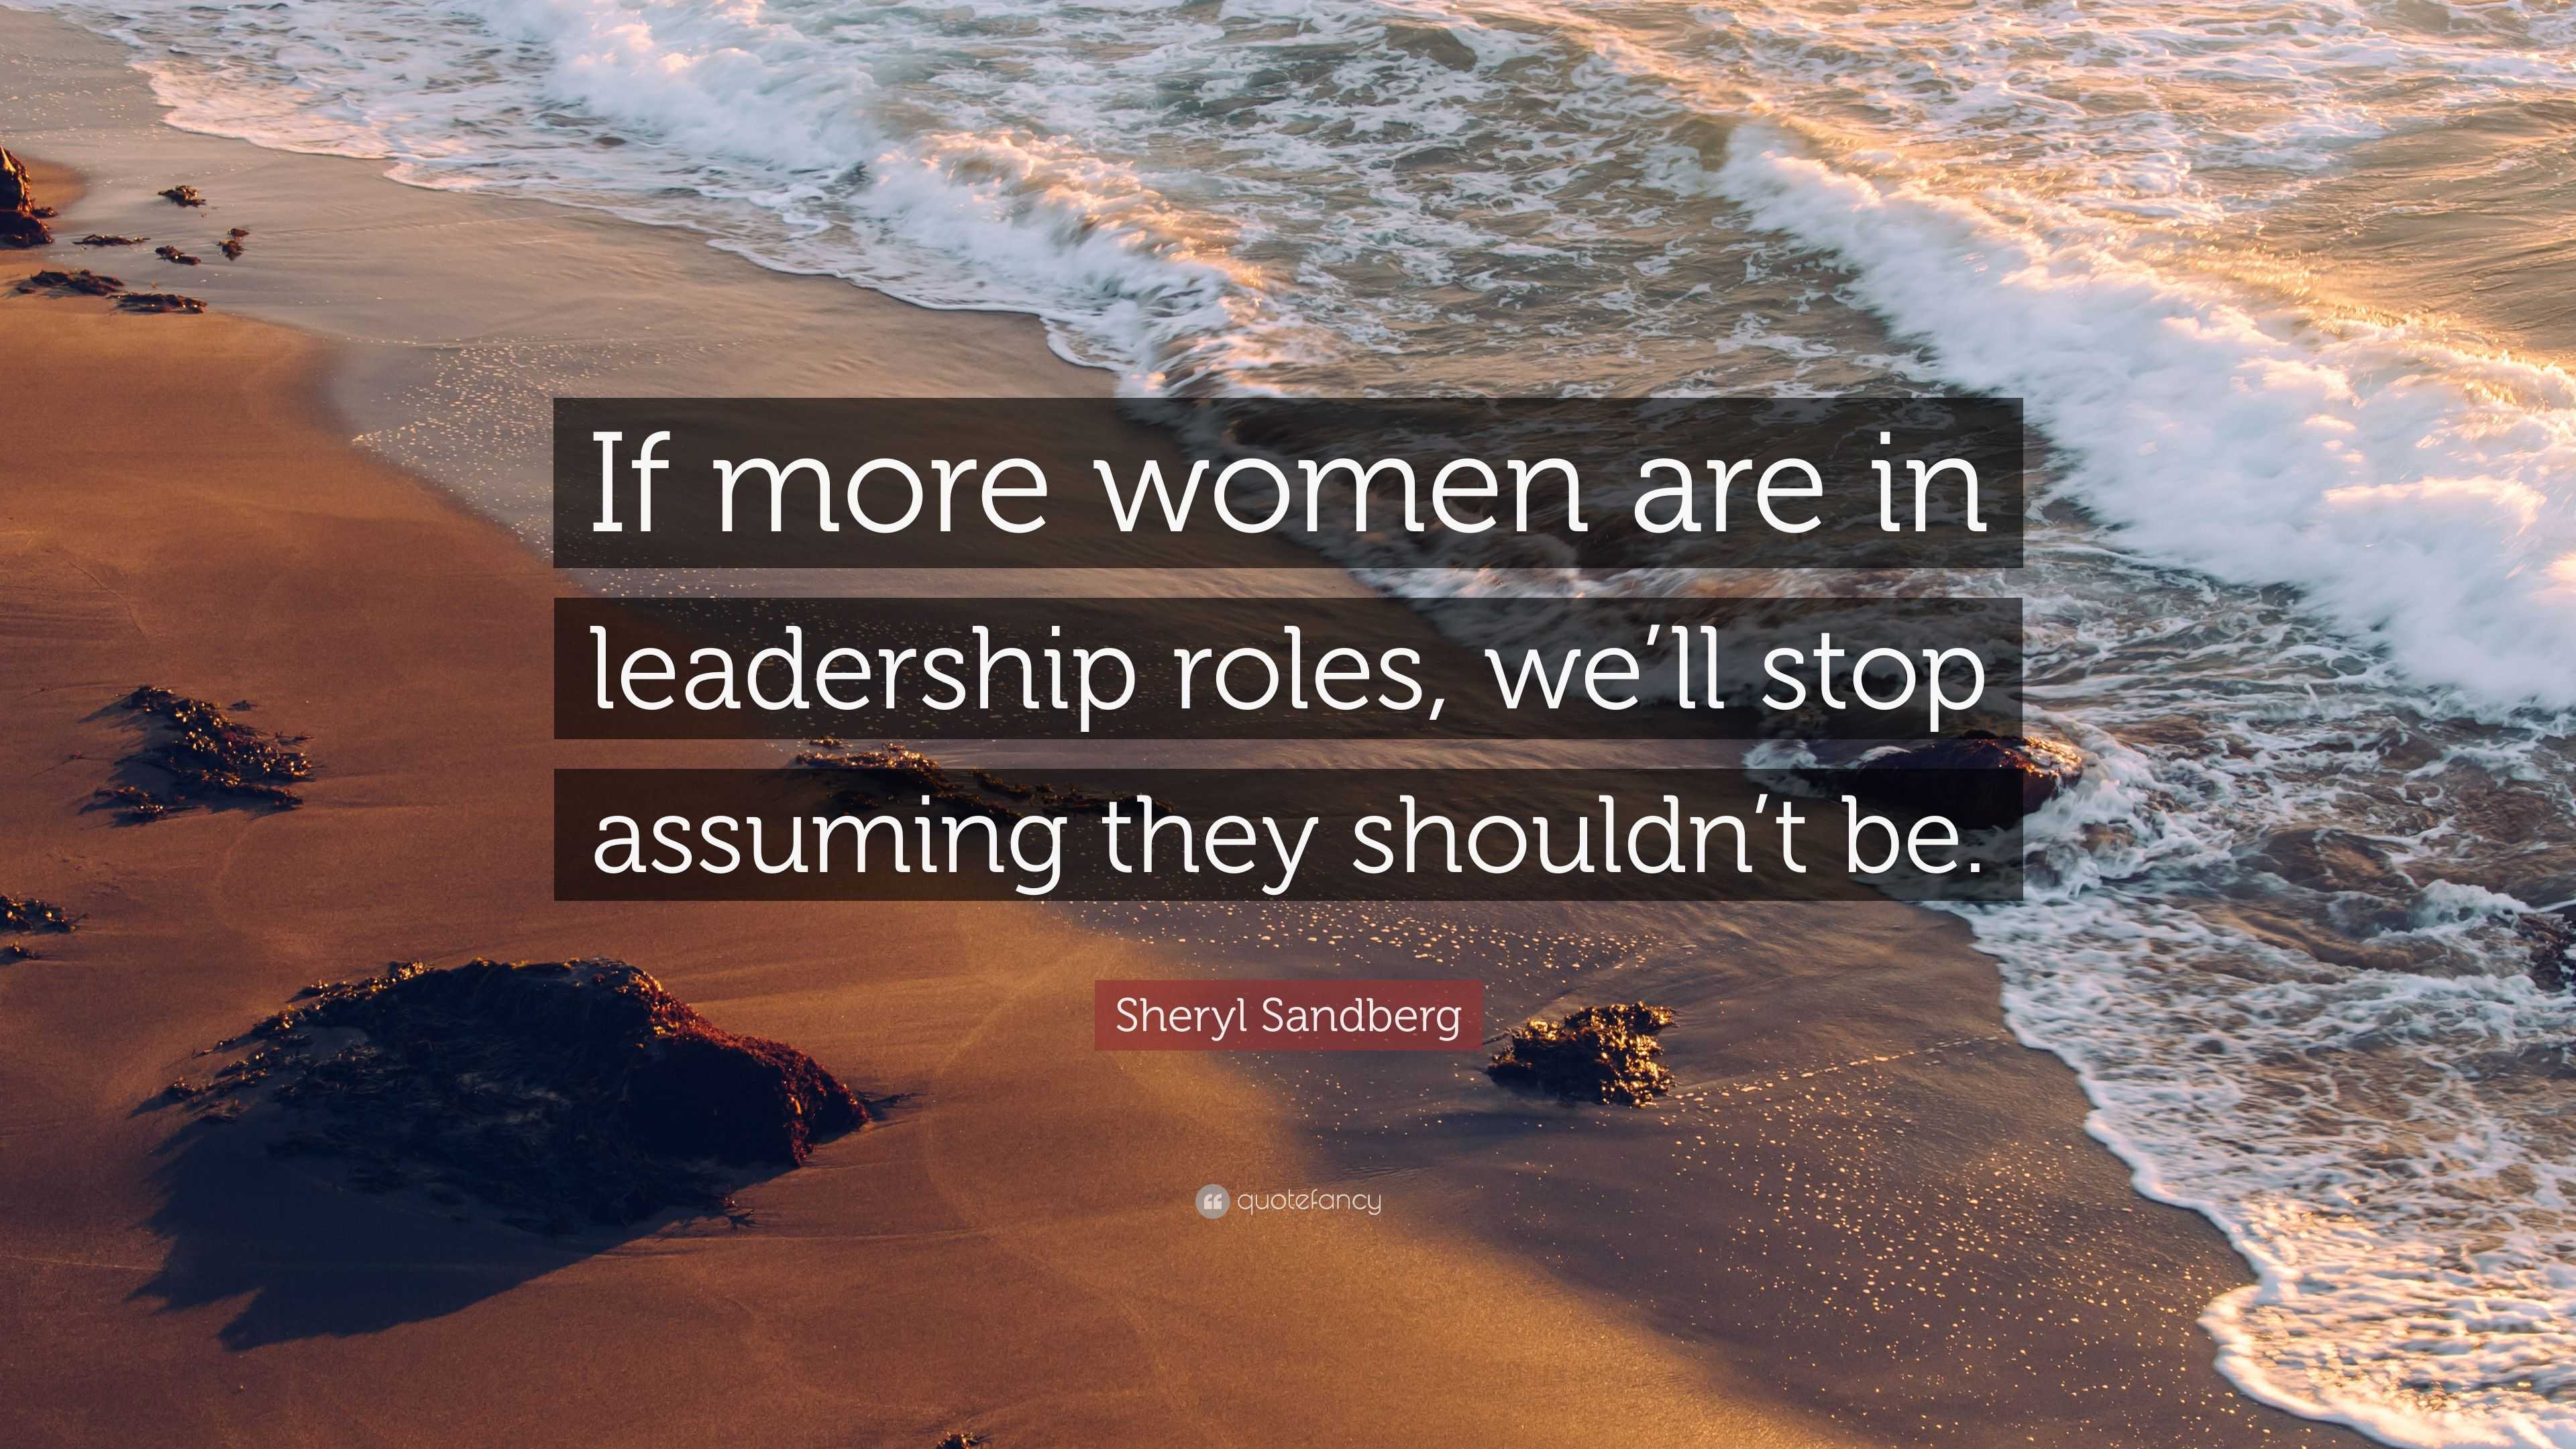 Sheryl Sandberg Quote “if More Women Are In Leadership Roles We’ll Stop Assuming They Shouldn